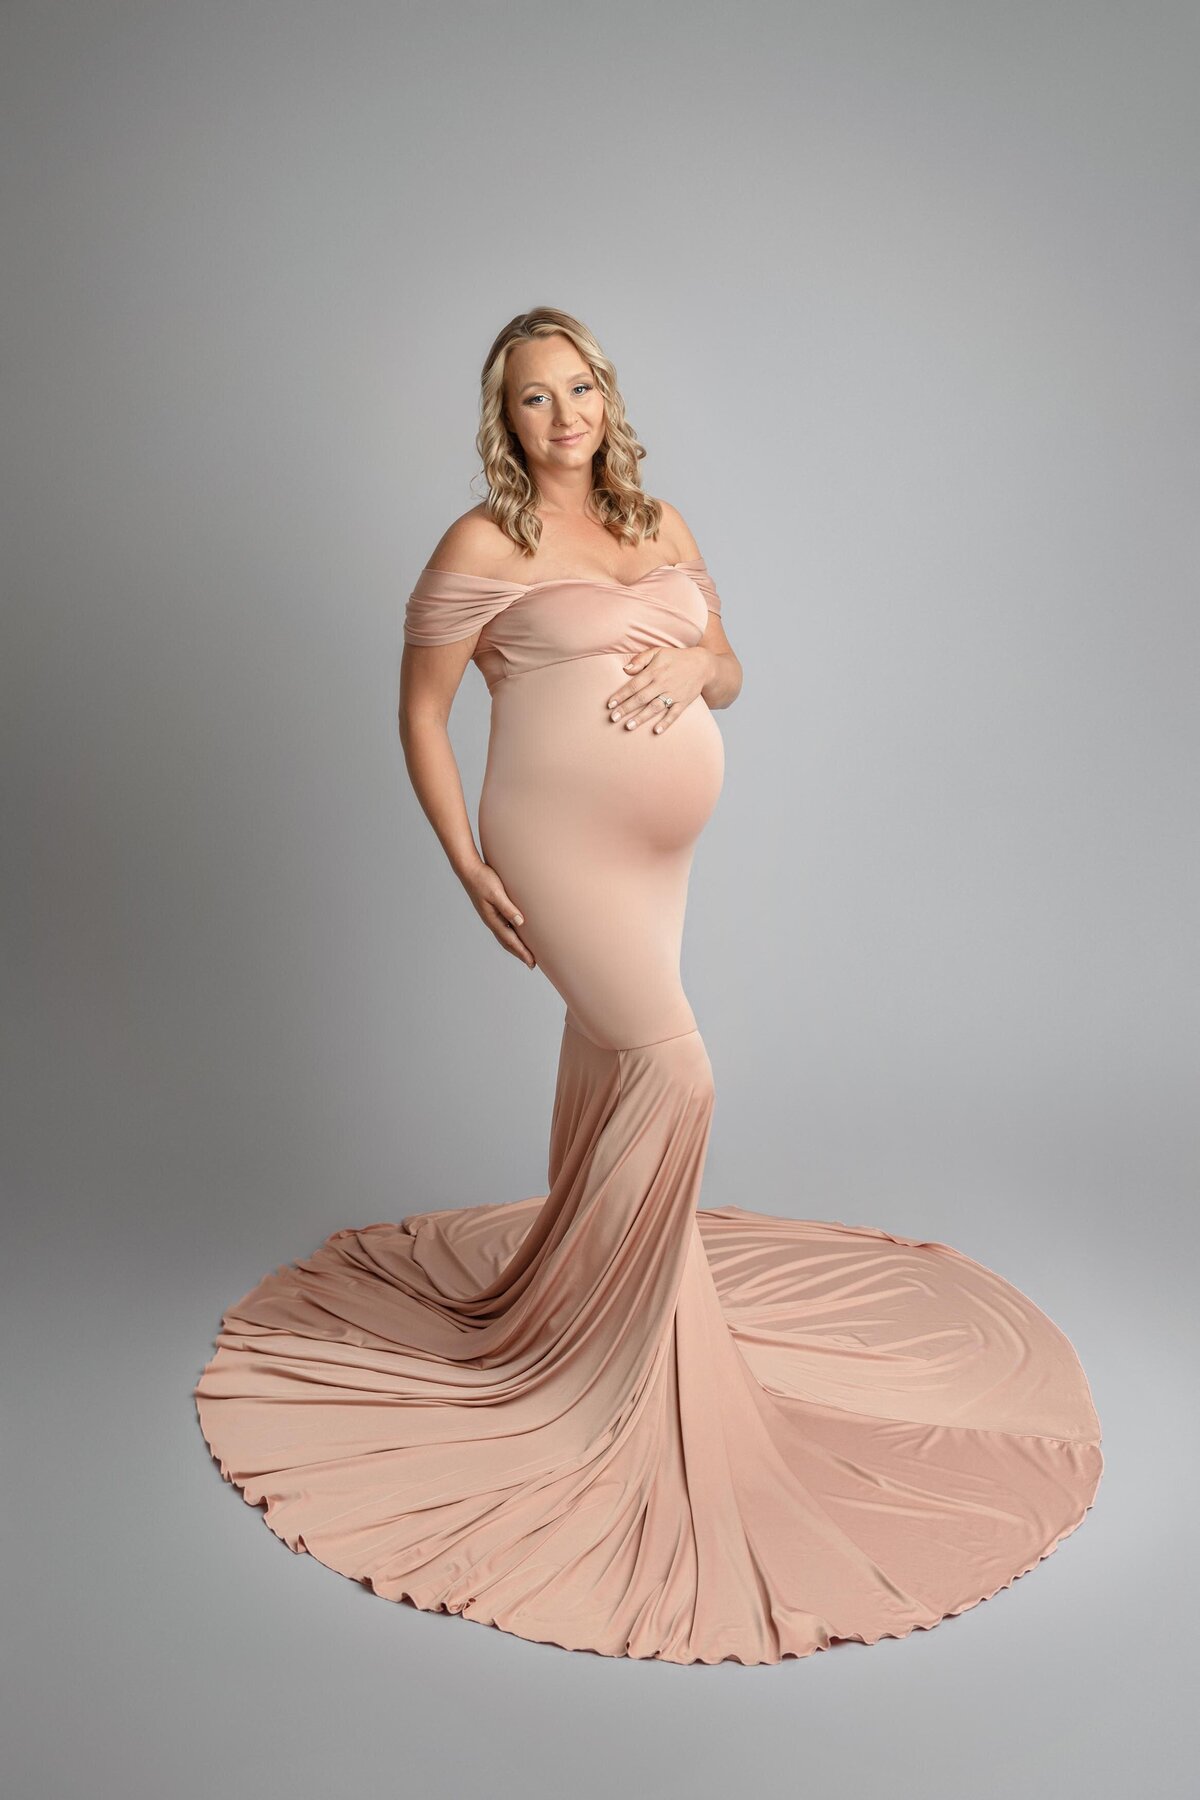 Expecting Mom In Pink Dress Draping on Ground Around Her